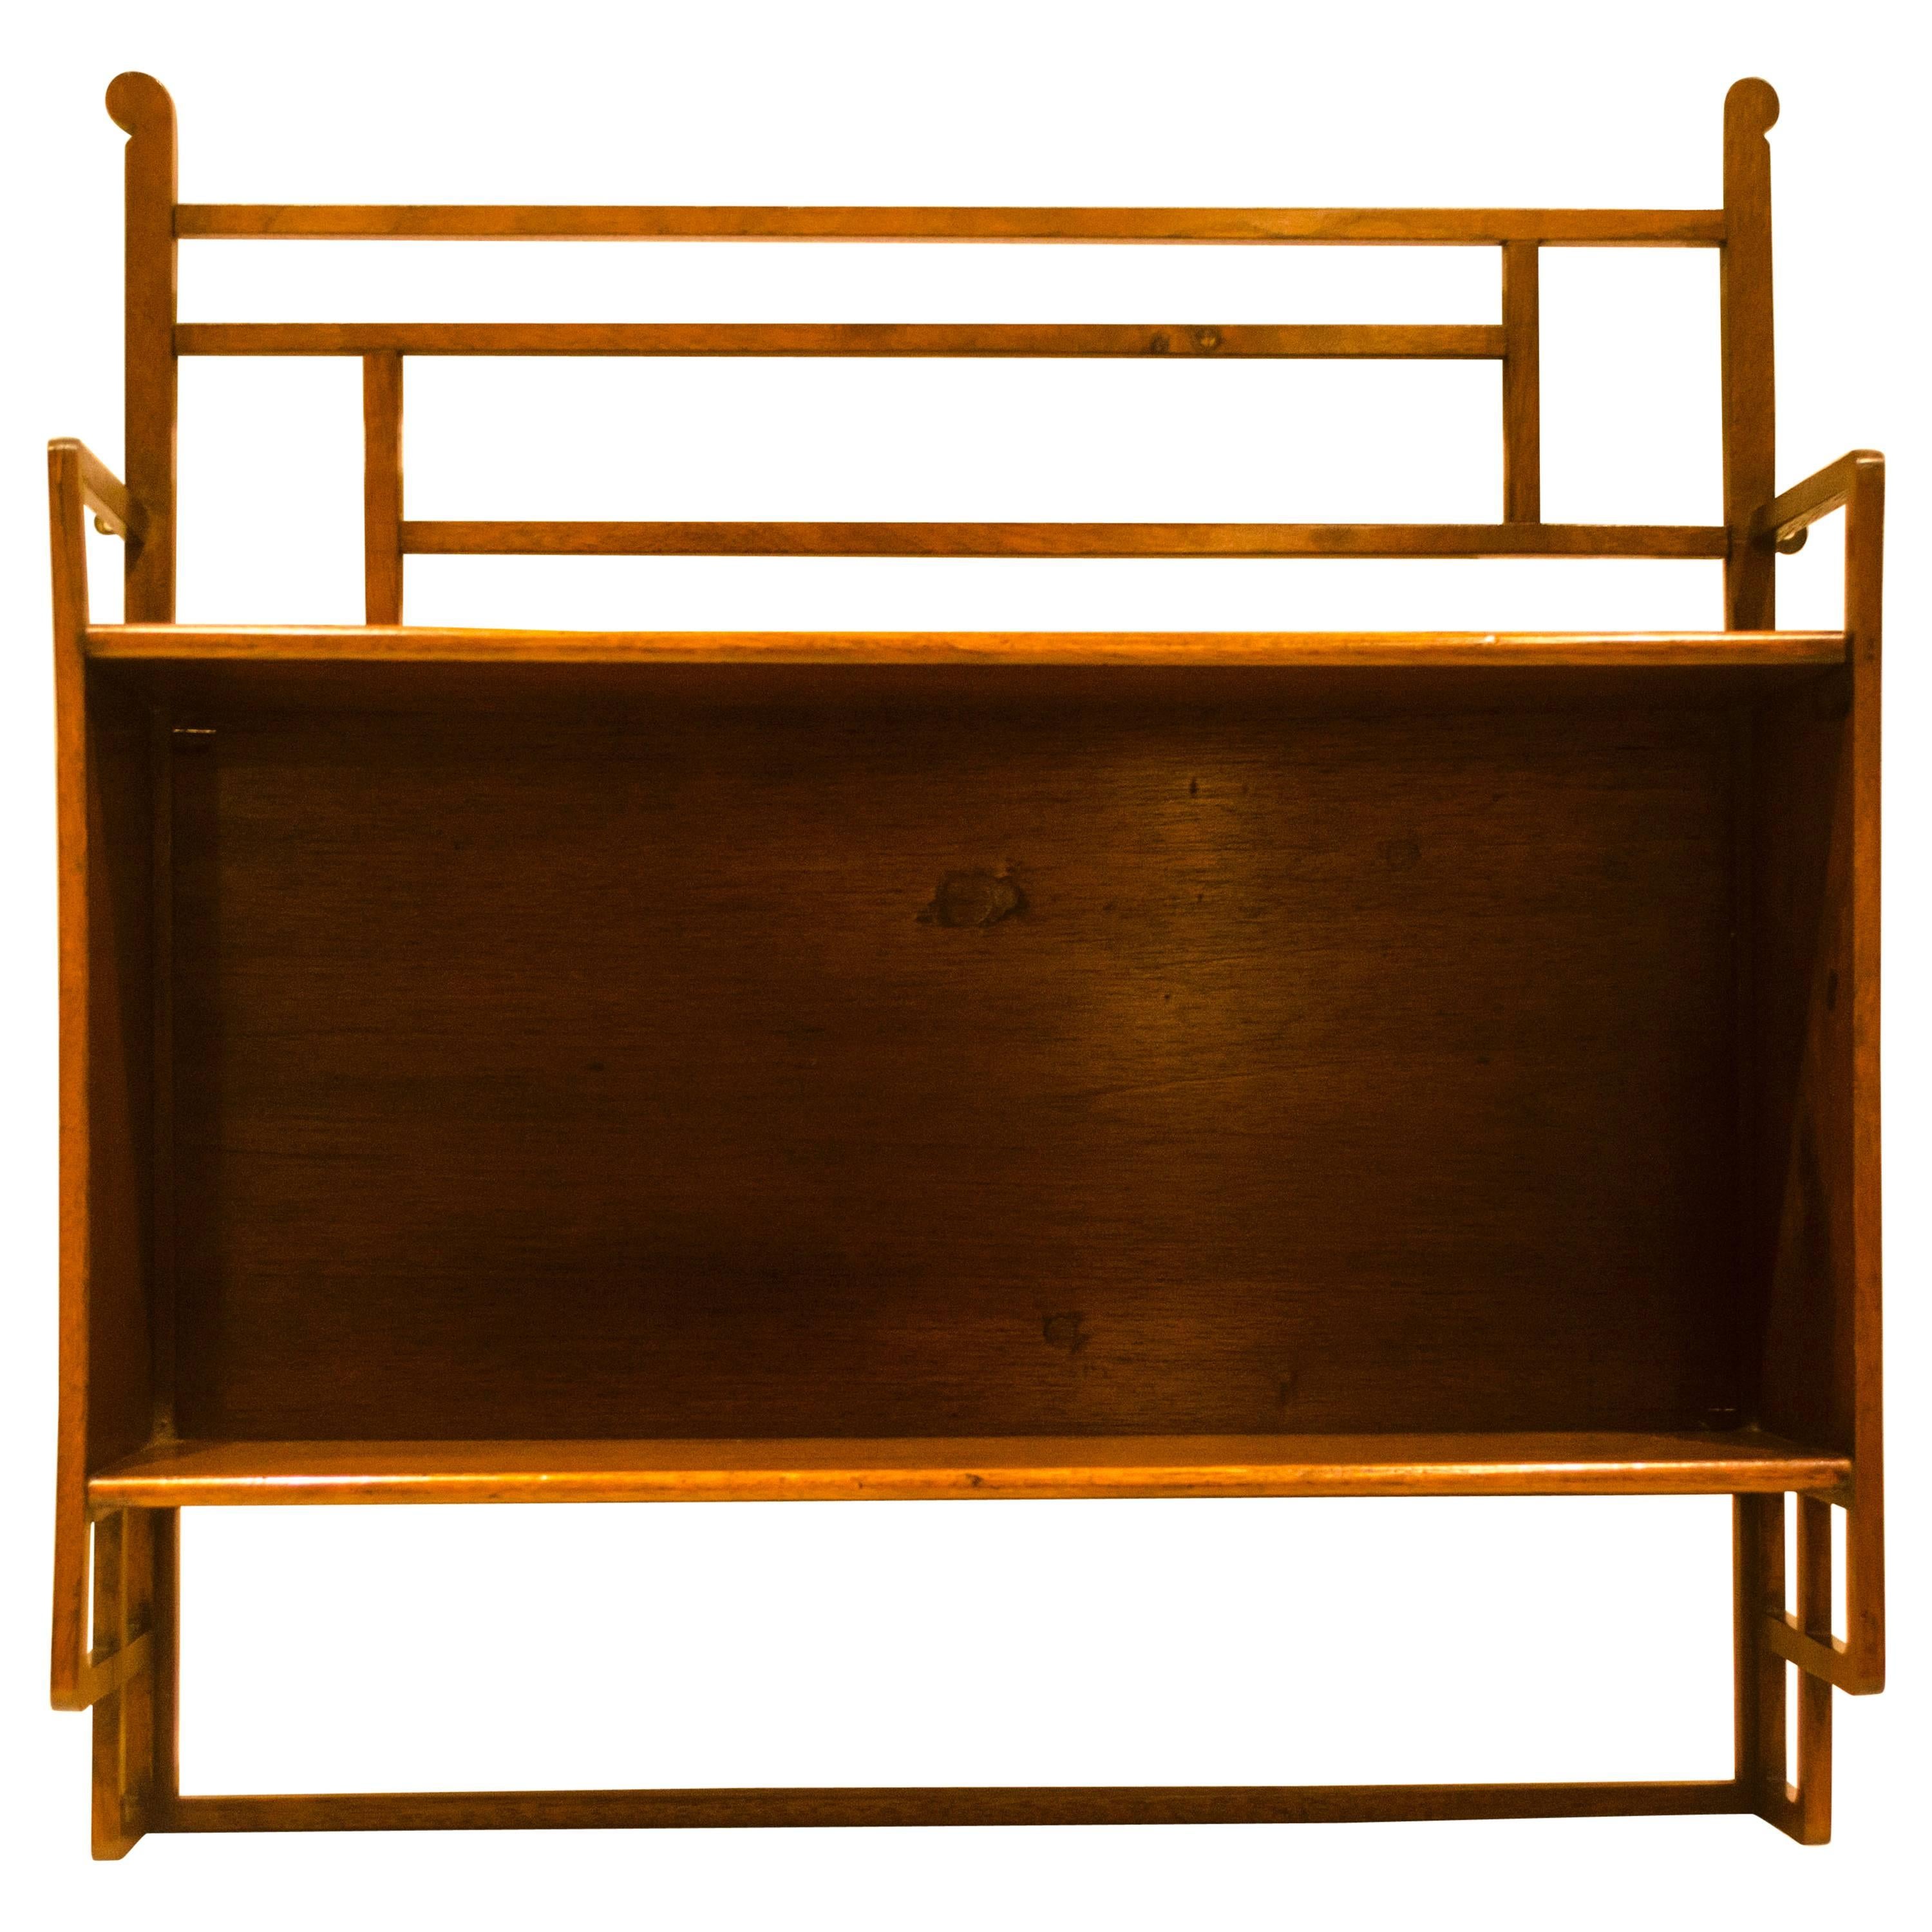 Anglo-Japanese Set of Mahogany Wall Shelves in the Manner of E. W. Godwin